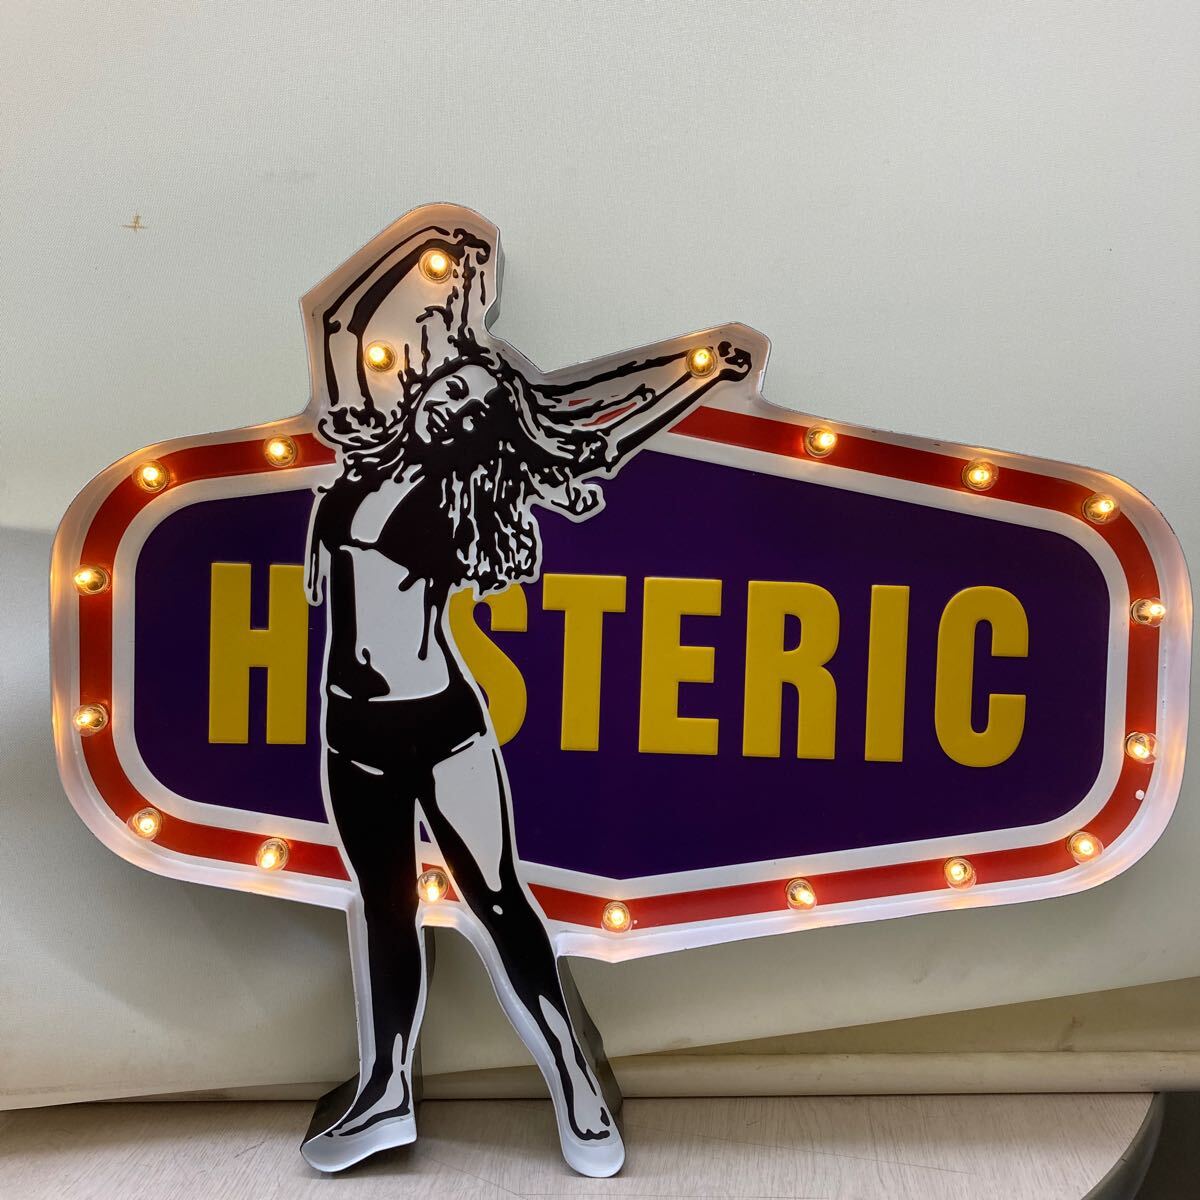 HYSTERIC GLAMOUR Novelty MARQUEE LIGHT Hysteric Glamour signboard ornament lamp lighting american miscellaneous goods 